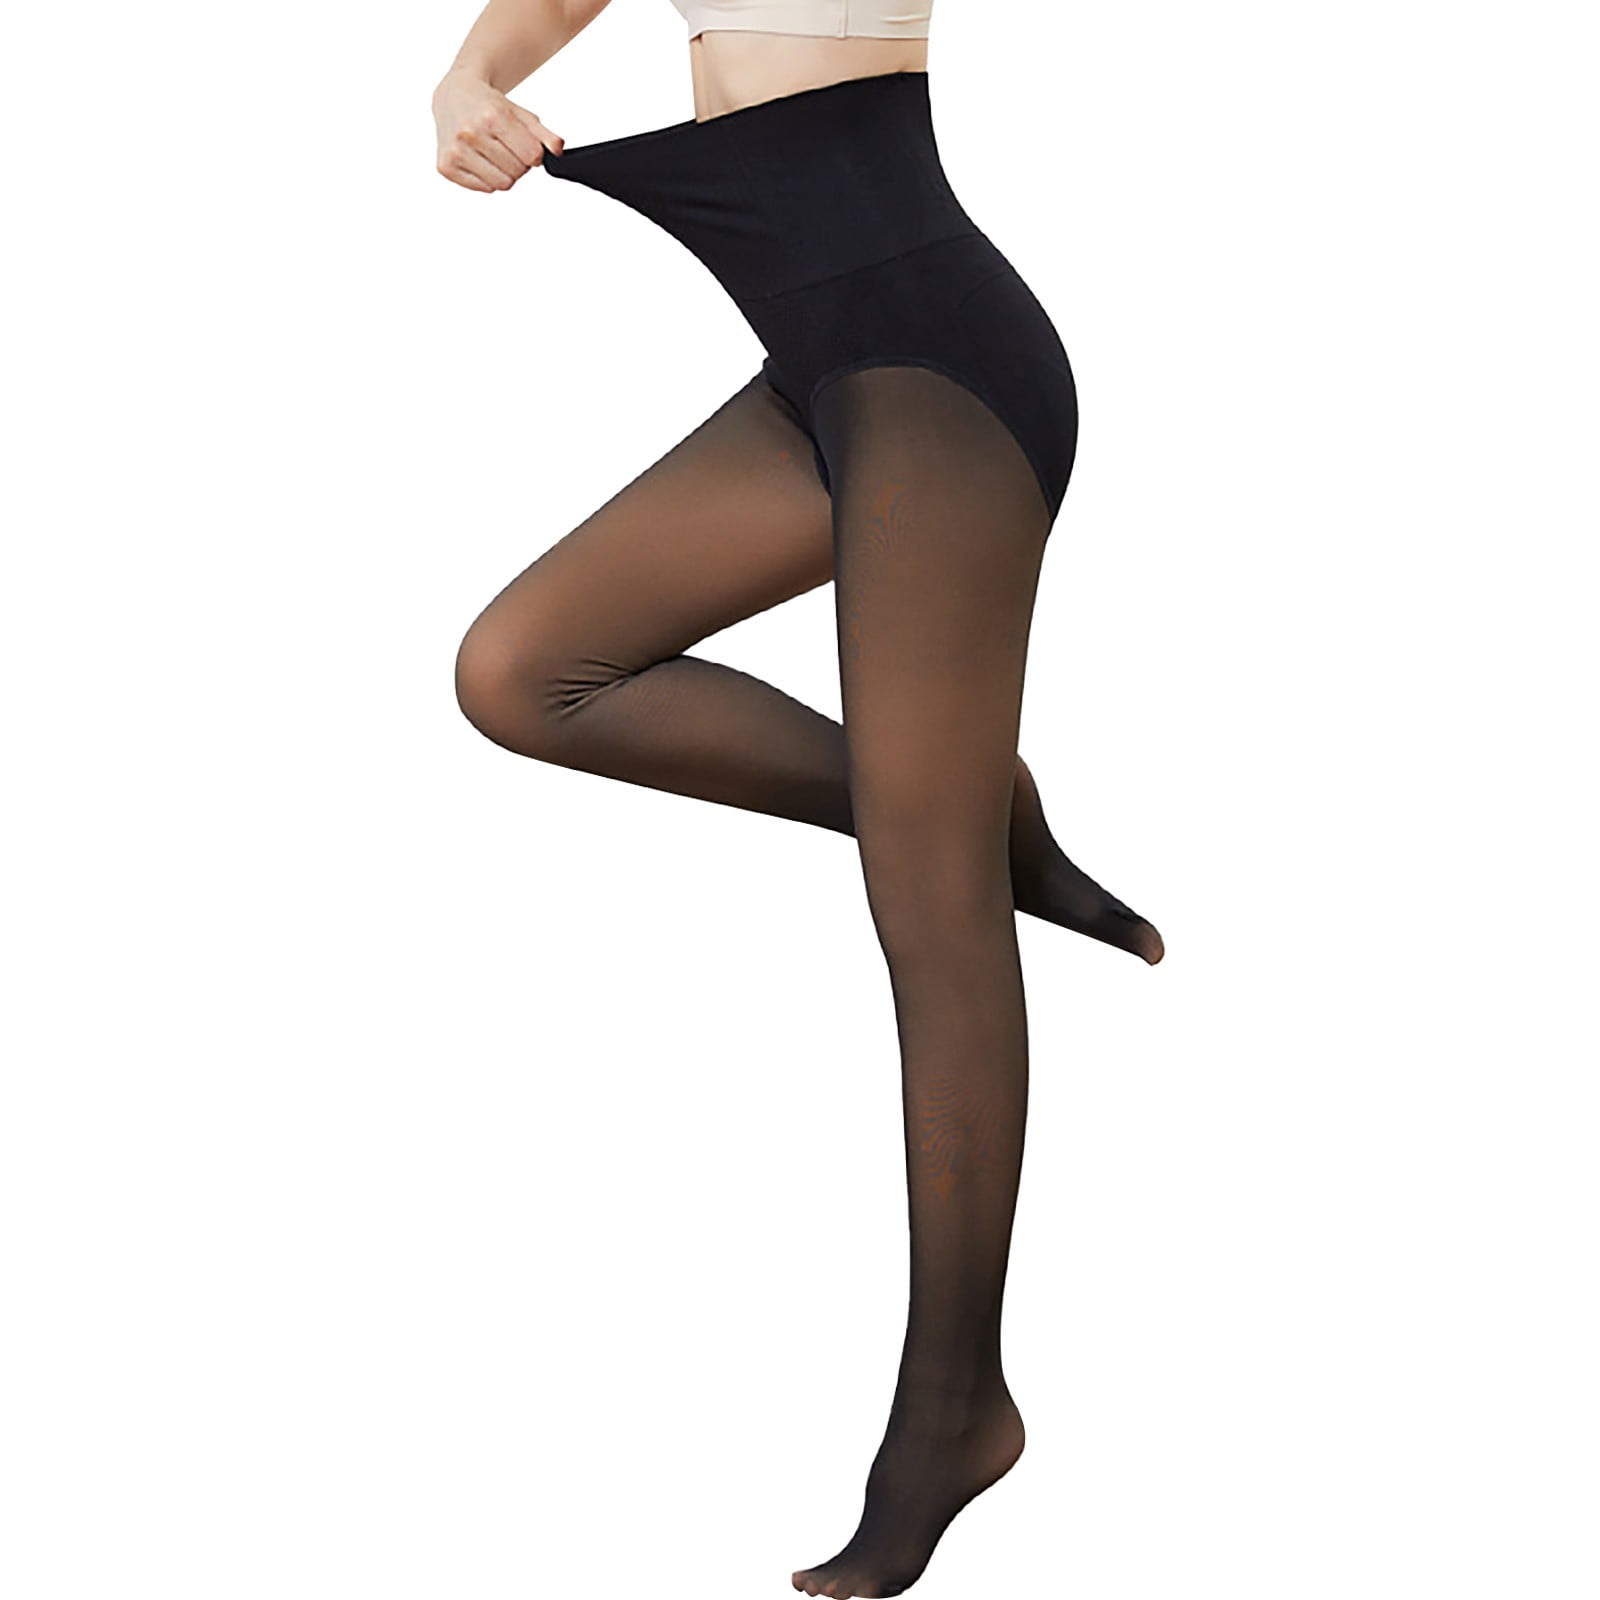 Our 1pc Ultra-Thin Faux Translucent Sheer Pantyhose, Bare Leg